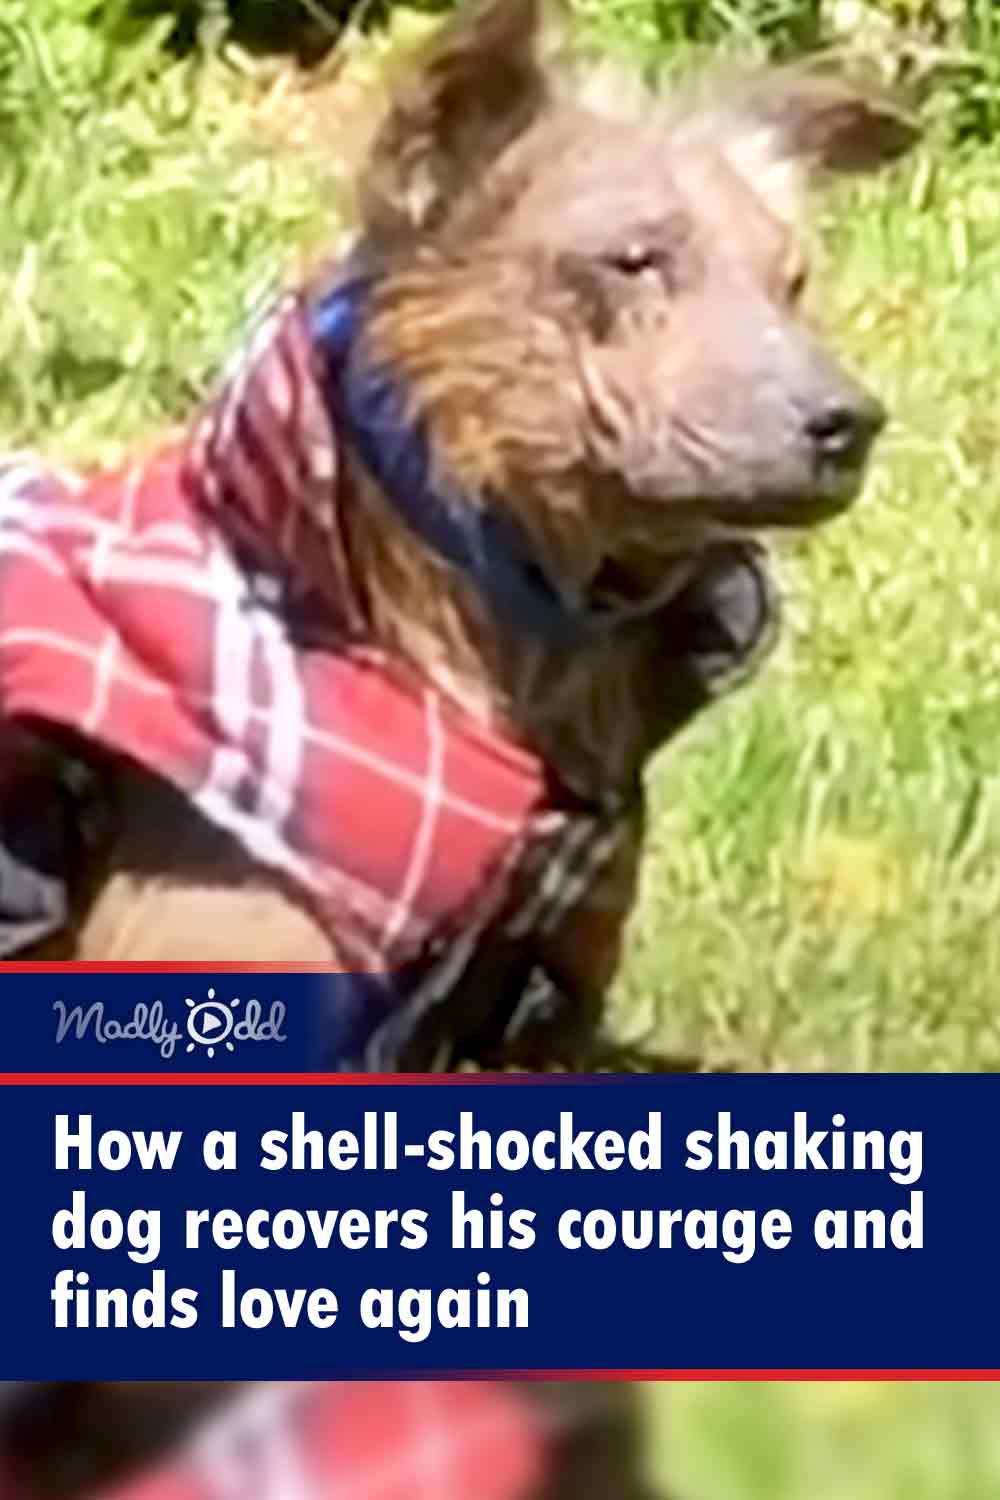 How a shell-shocked shaking dog recovers his courage and finds love again